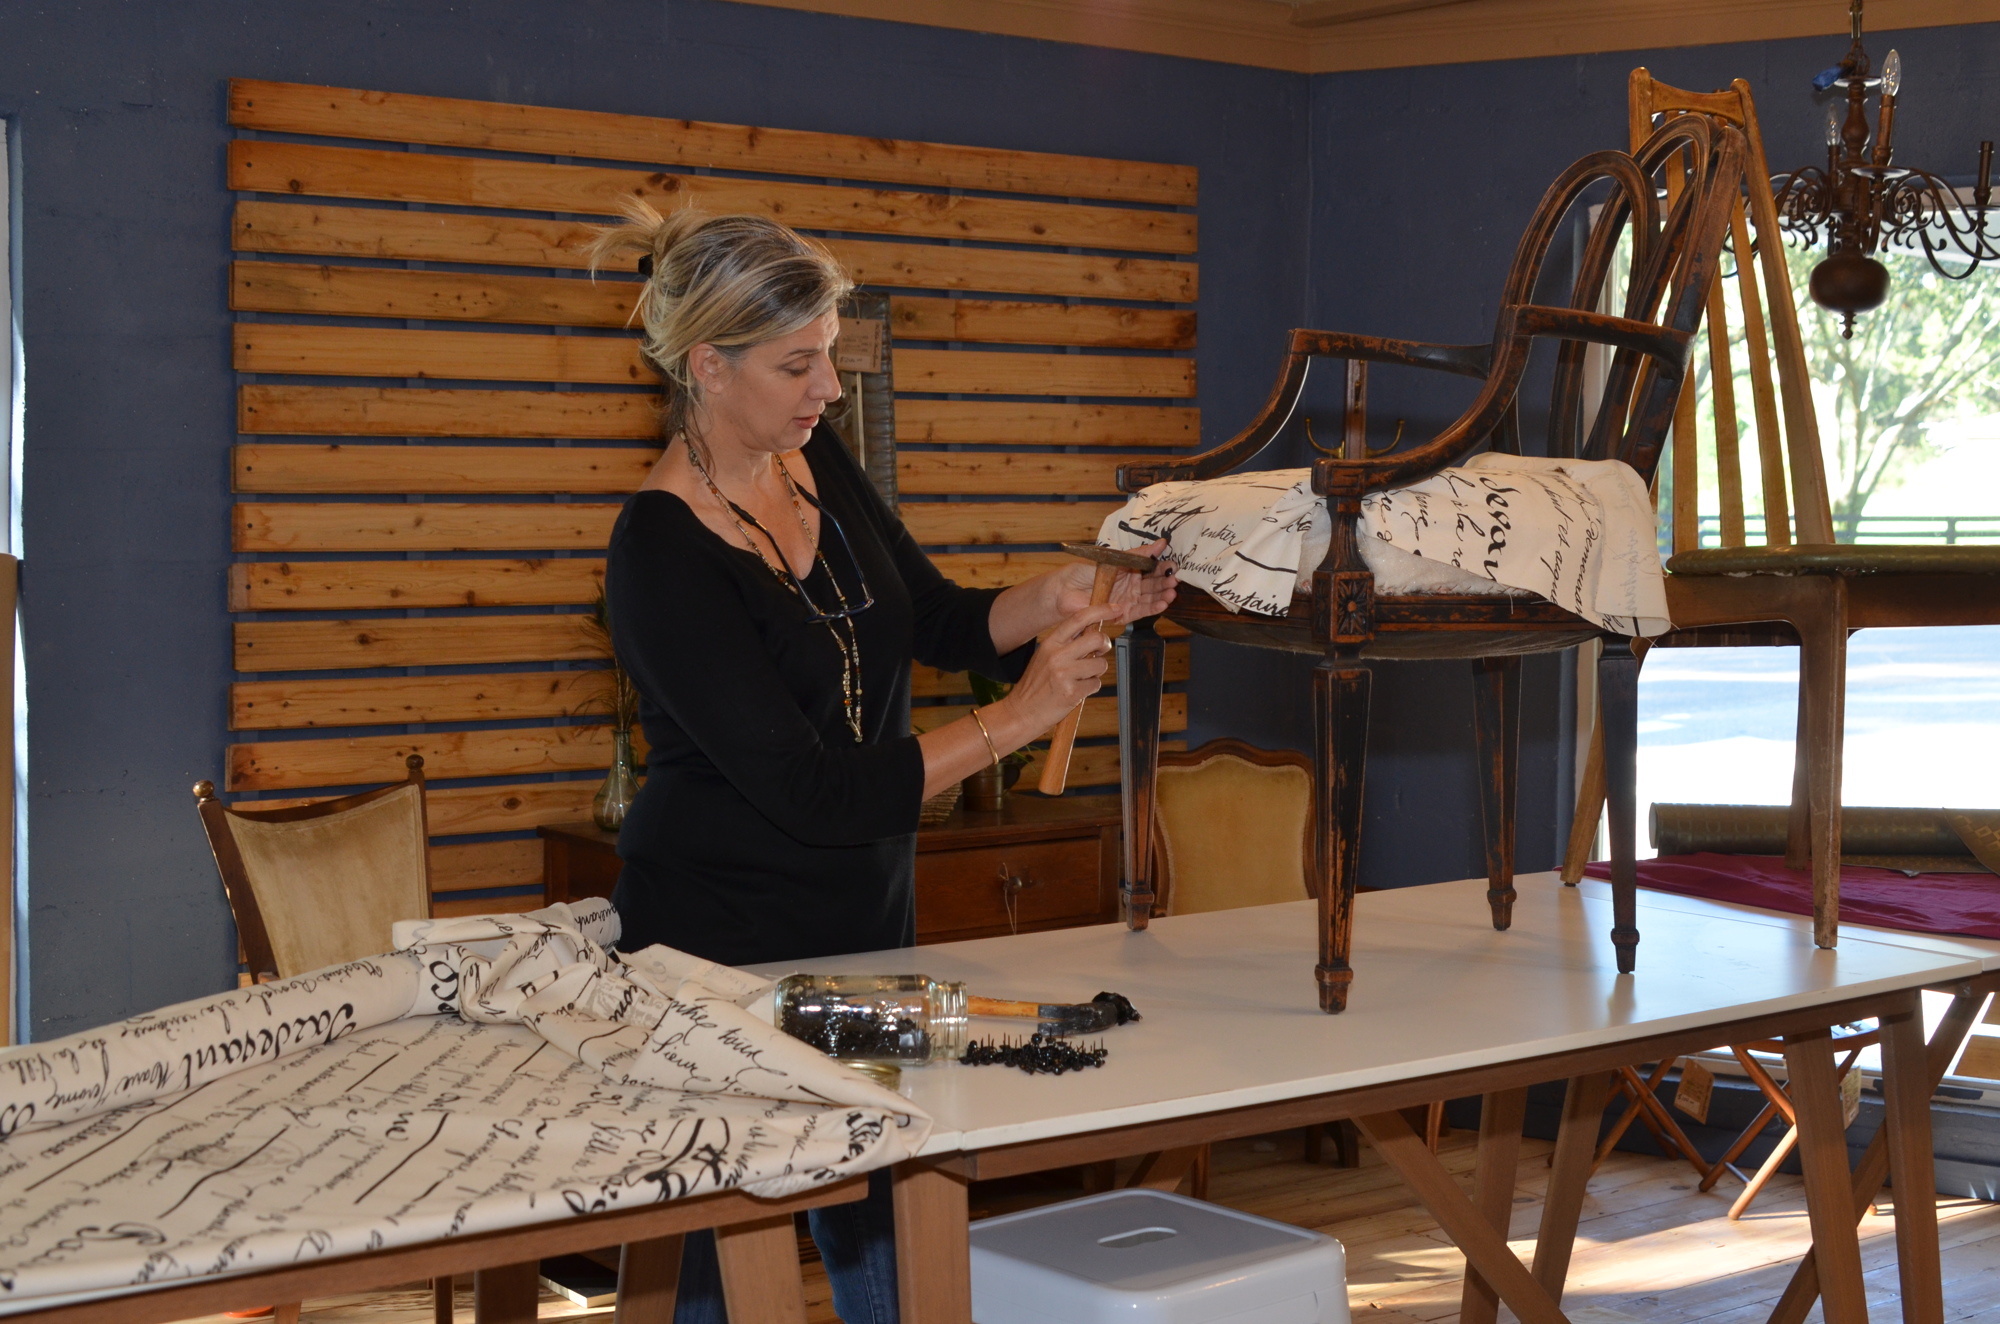 Tina LaVallee takes old chairs and makes them new again